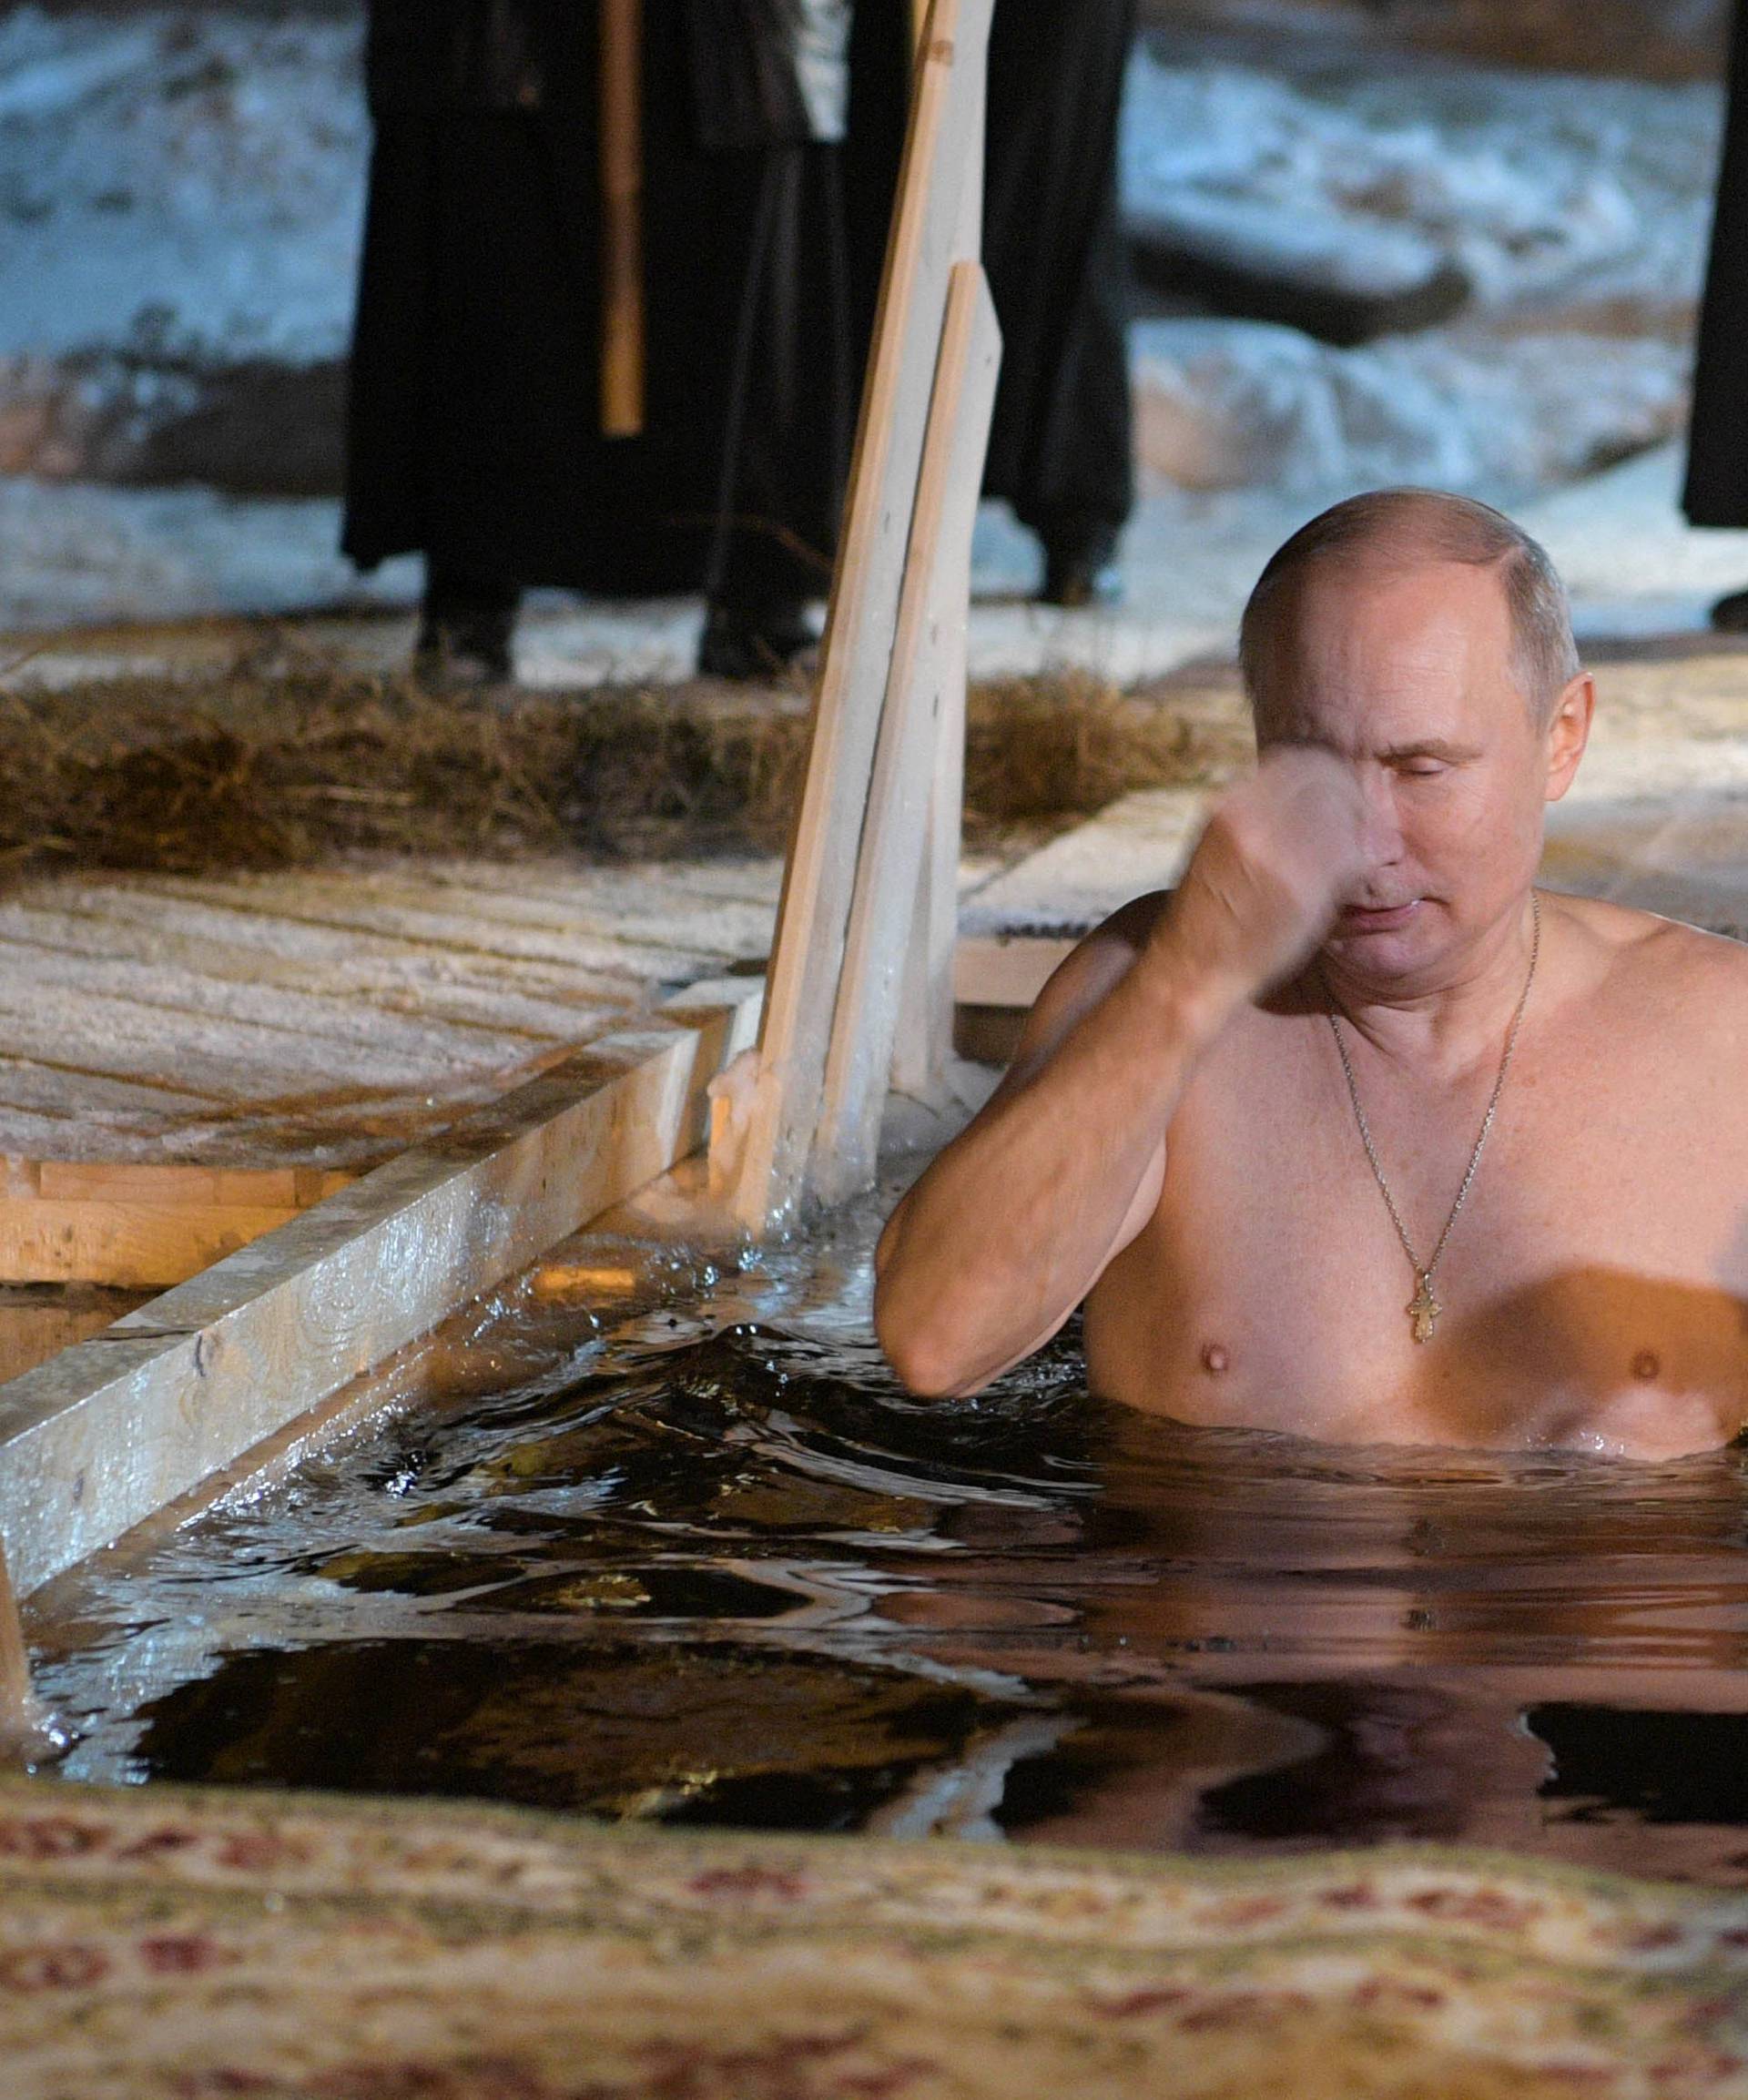 Russian President Vladimir Putin croses himself as he takes a dip in the water during Orthodox Epiphany celebrations at lake Seliger, Tver region